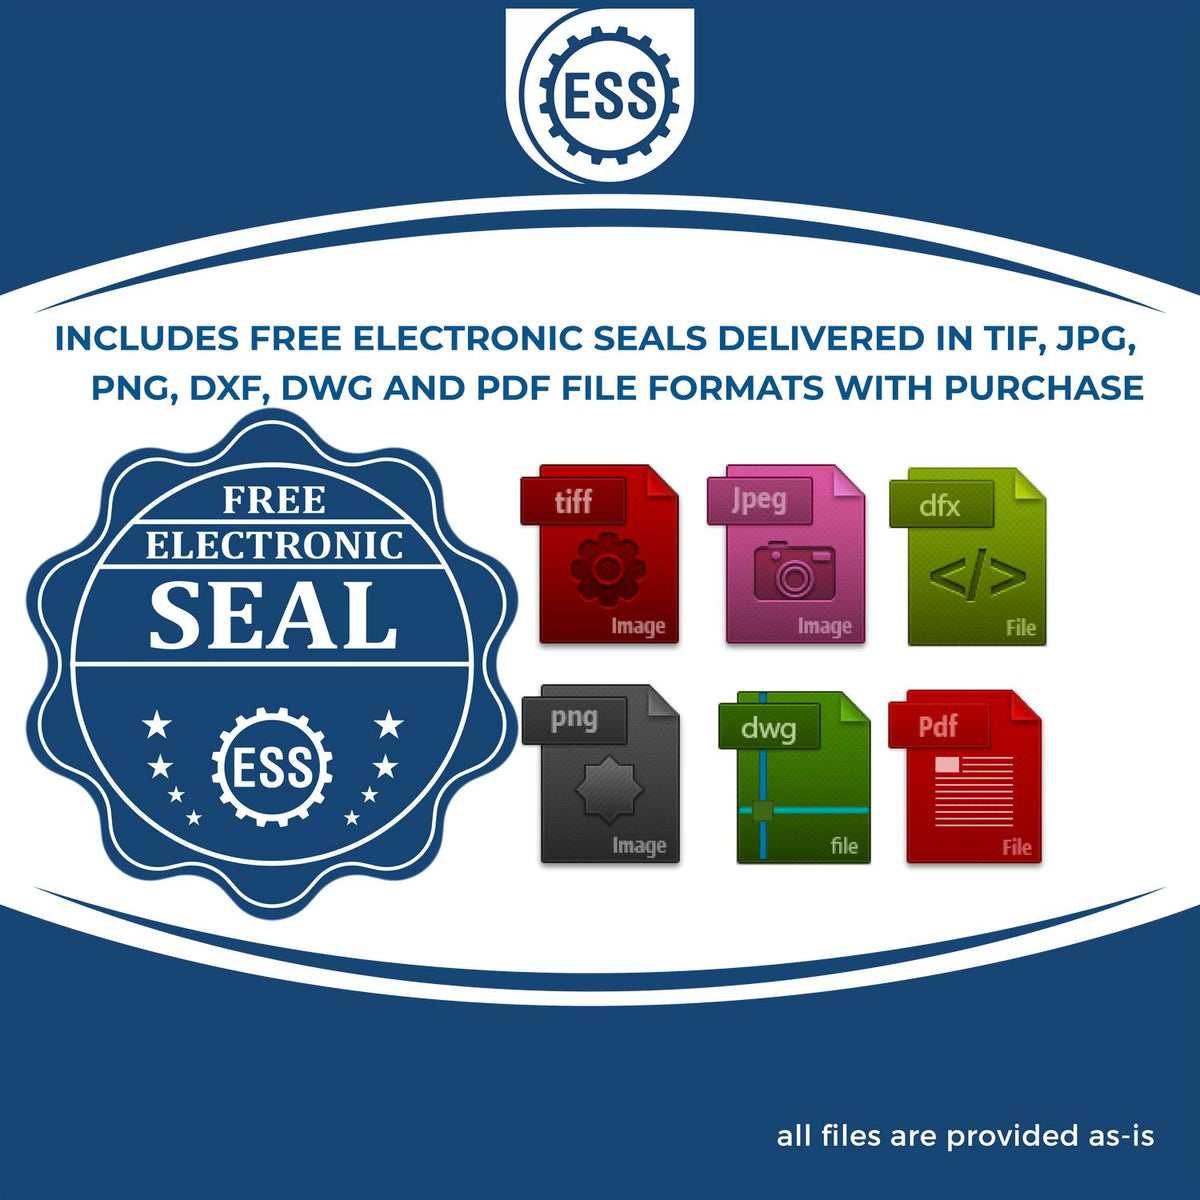 An infographic for the free electronic seal for the Slim Pre-Inked State Seal Notary Stamp for New Mexico illustrating the different file type icons such as DXF, DWG, TIF, JPG and PNG.